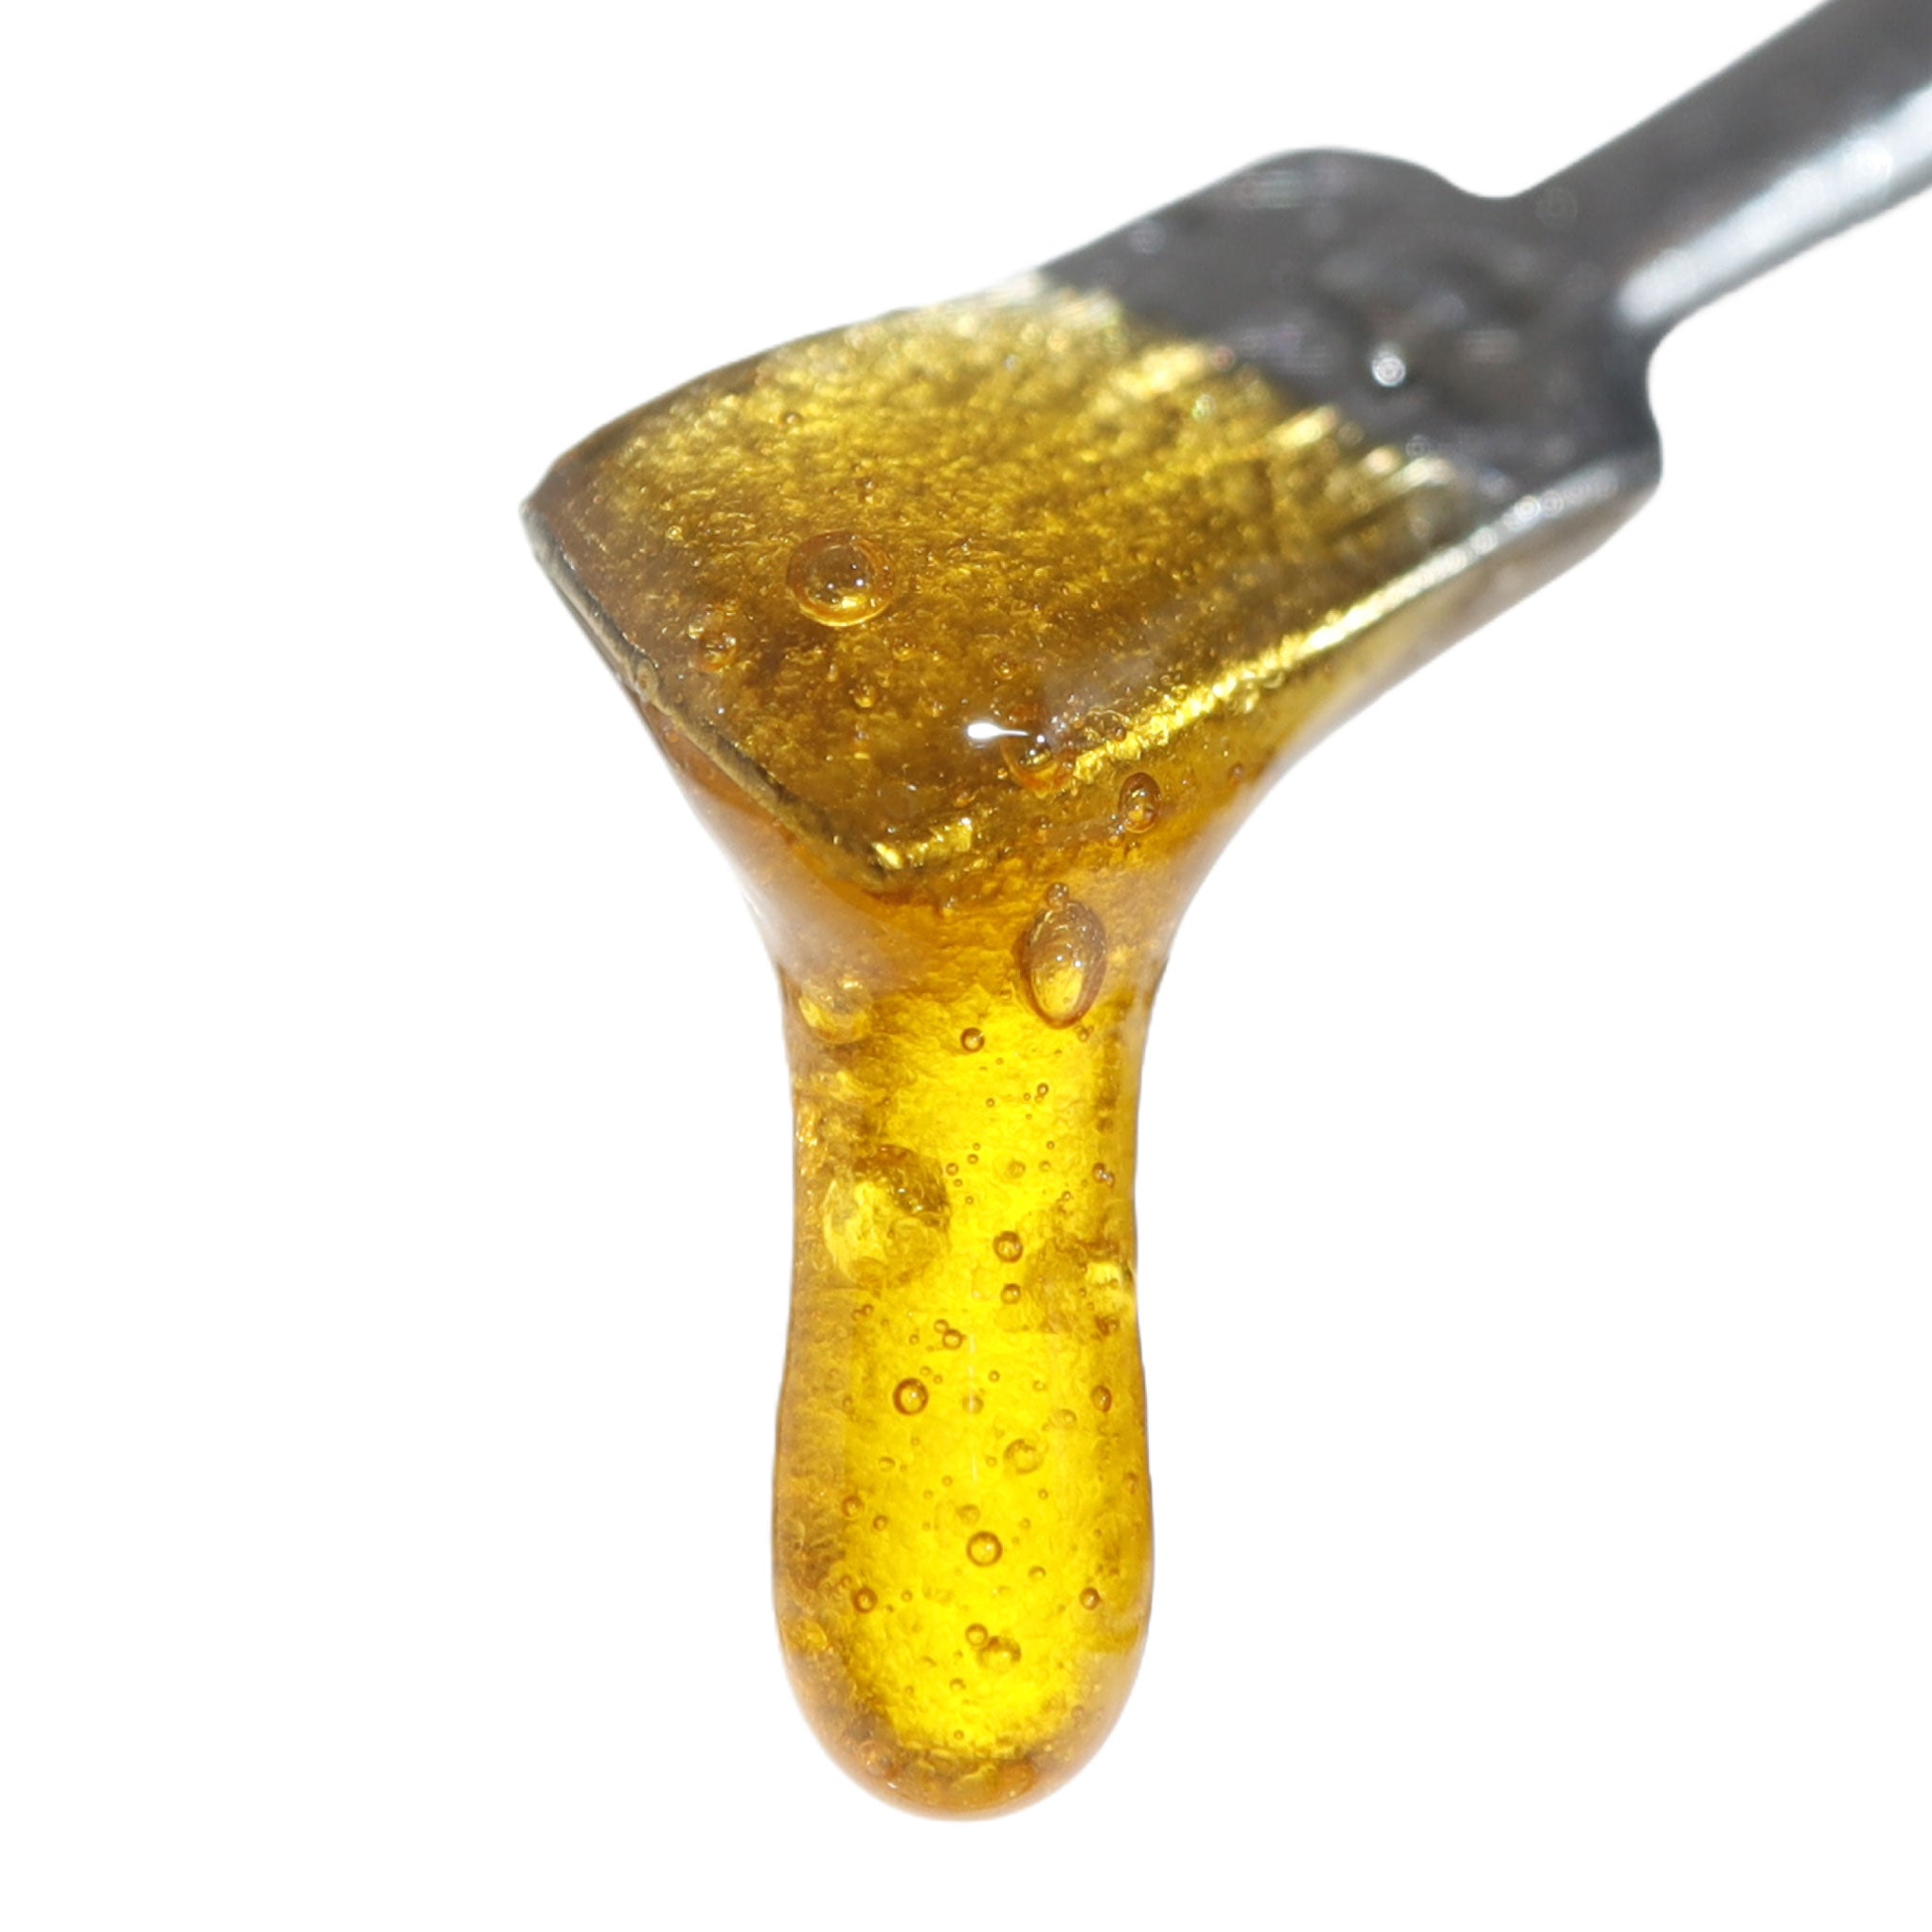 Image of Abacus CBD Live Resin dripping from a dab tool.